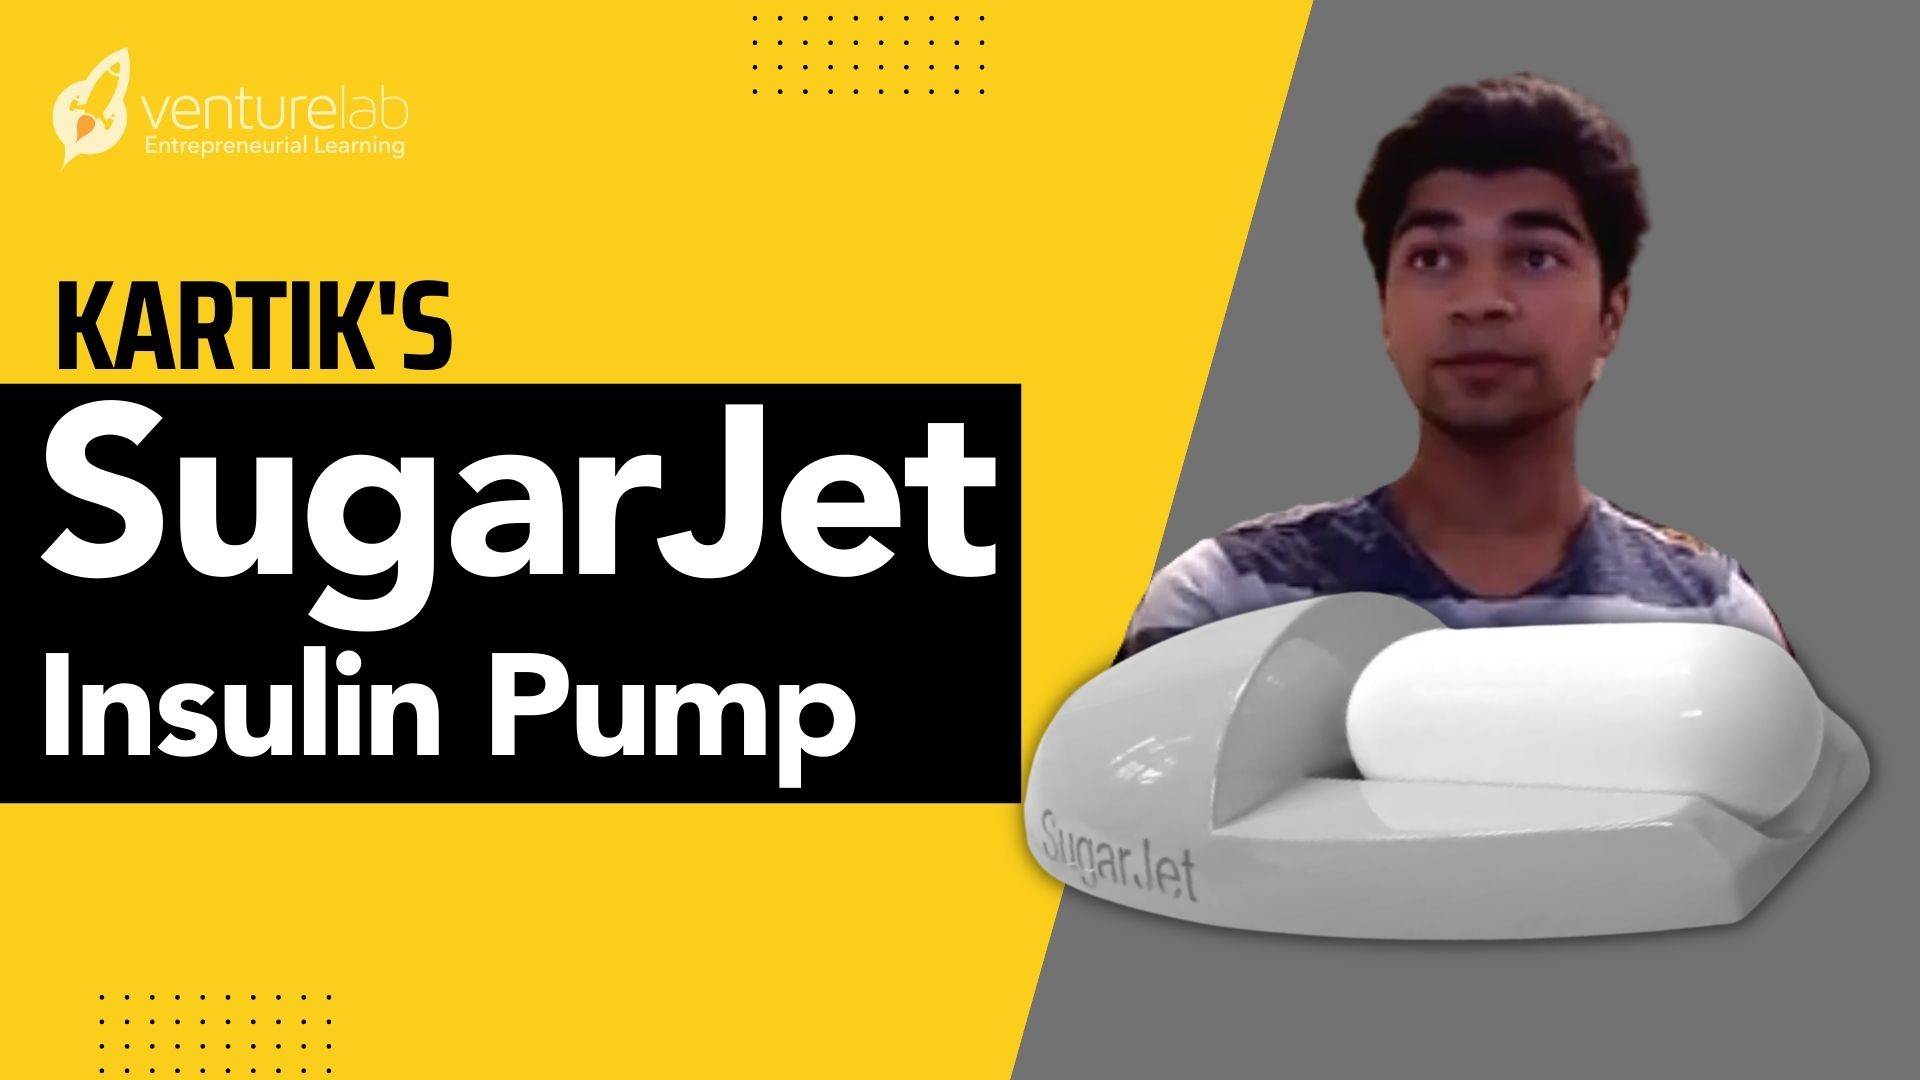 16-year-old Kartik's pitch for his invention, SugarJet, a painless affordable insulin pump